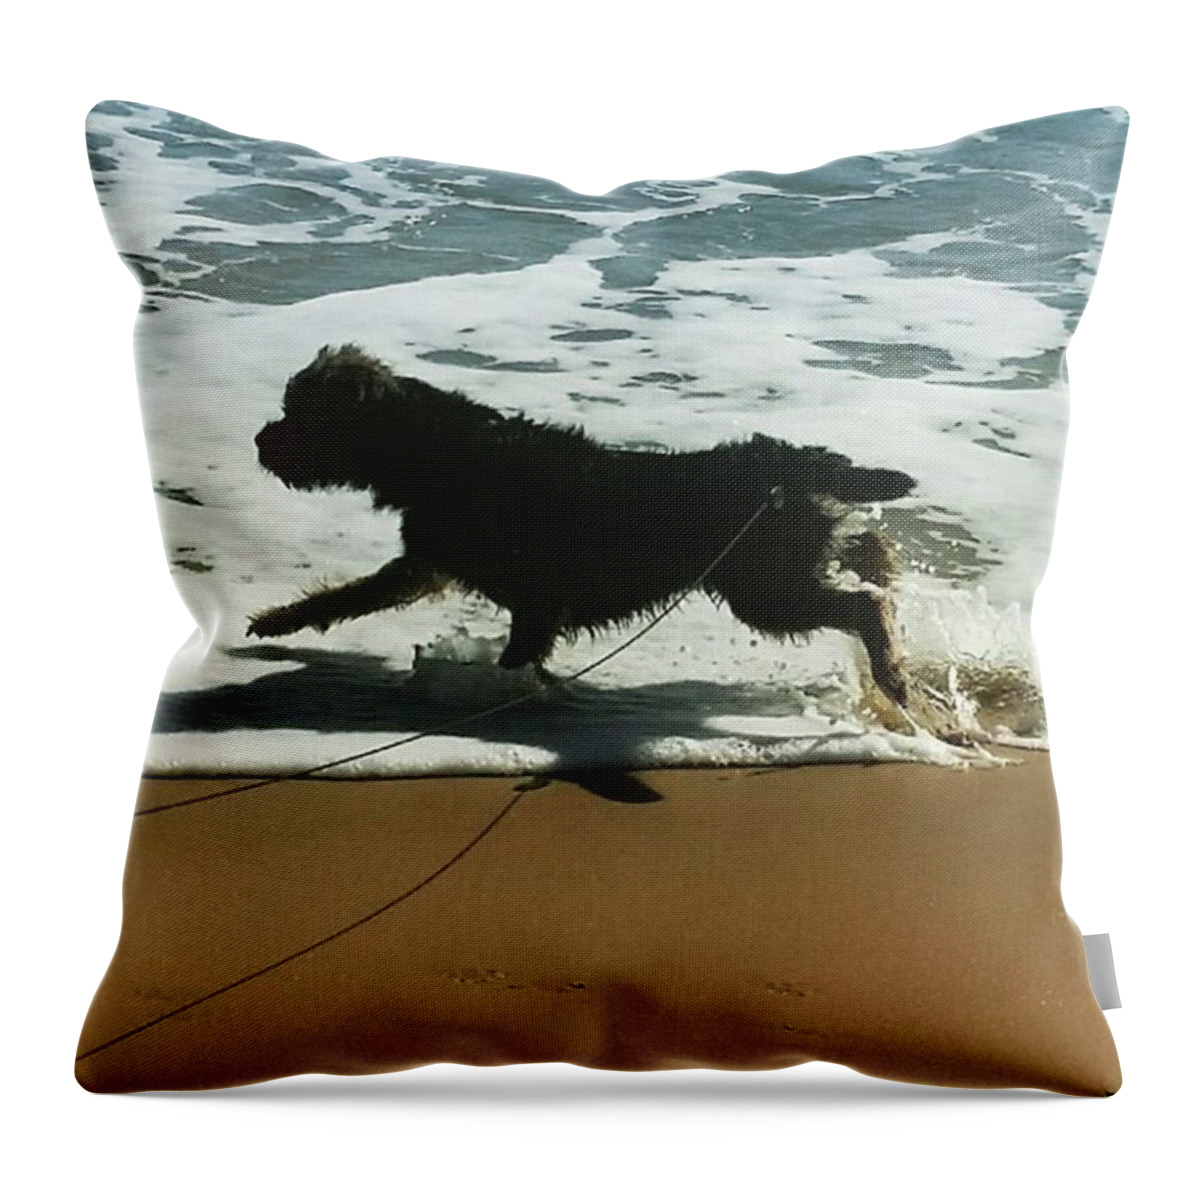 Dog Throw Pillow featuring the photograph Seaside Frolics by Rowena Tutty